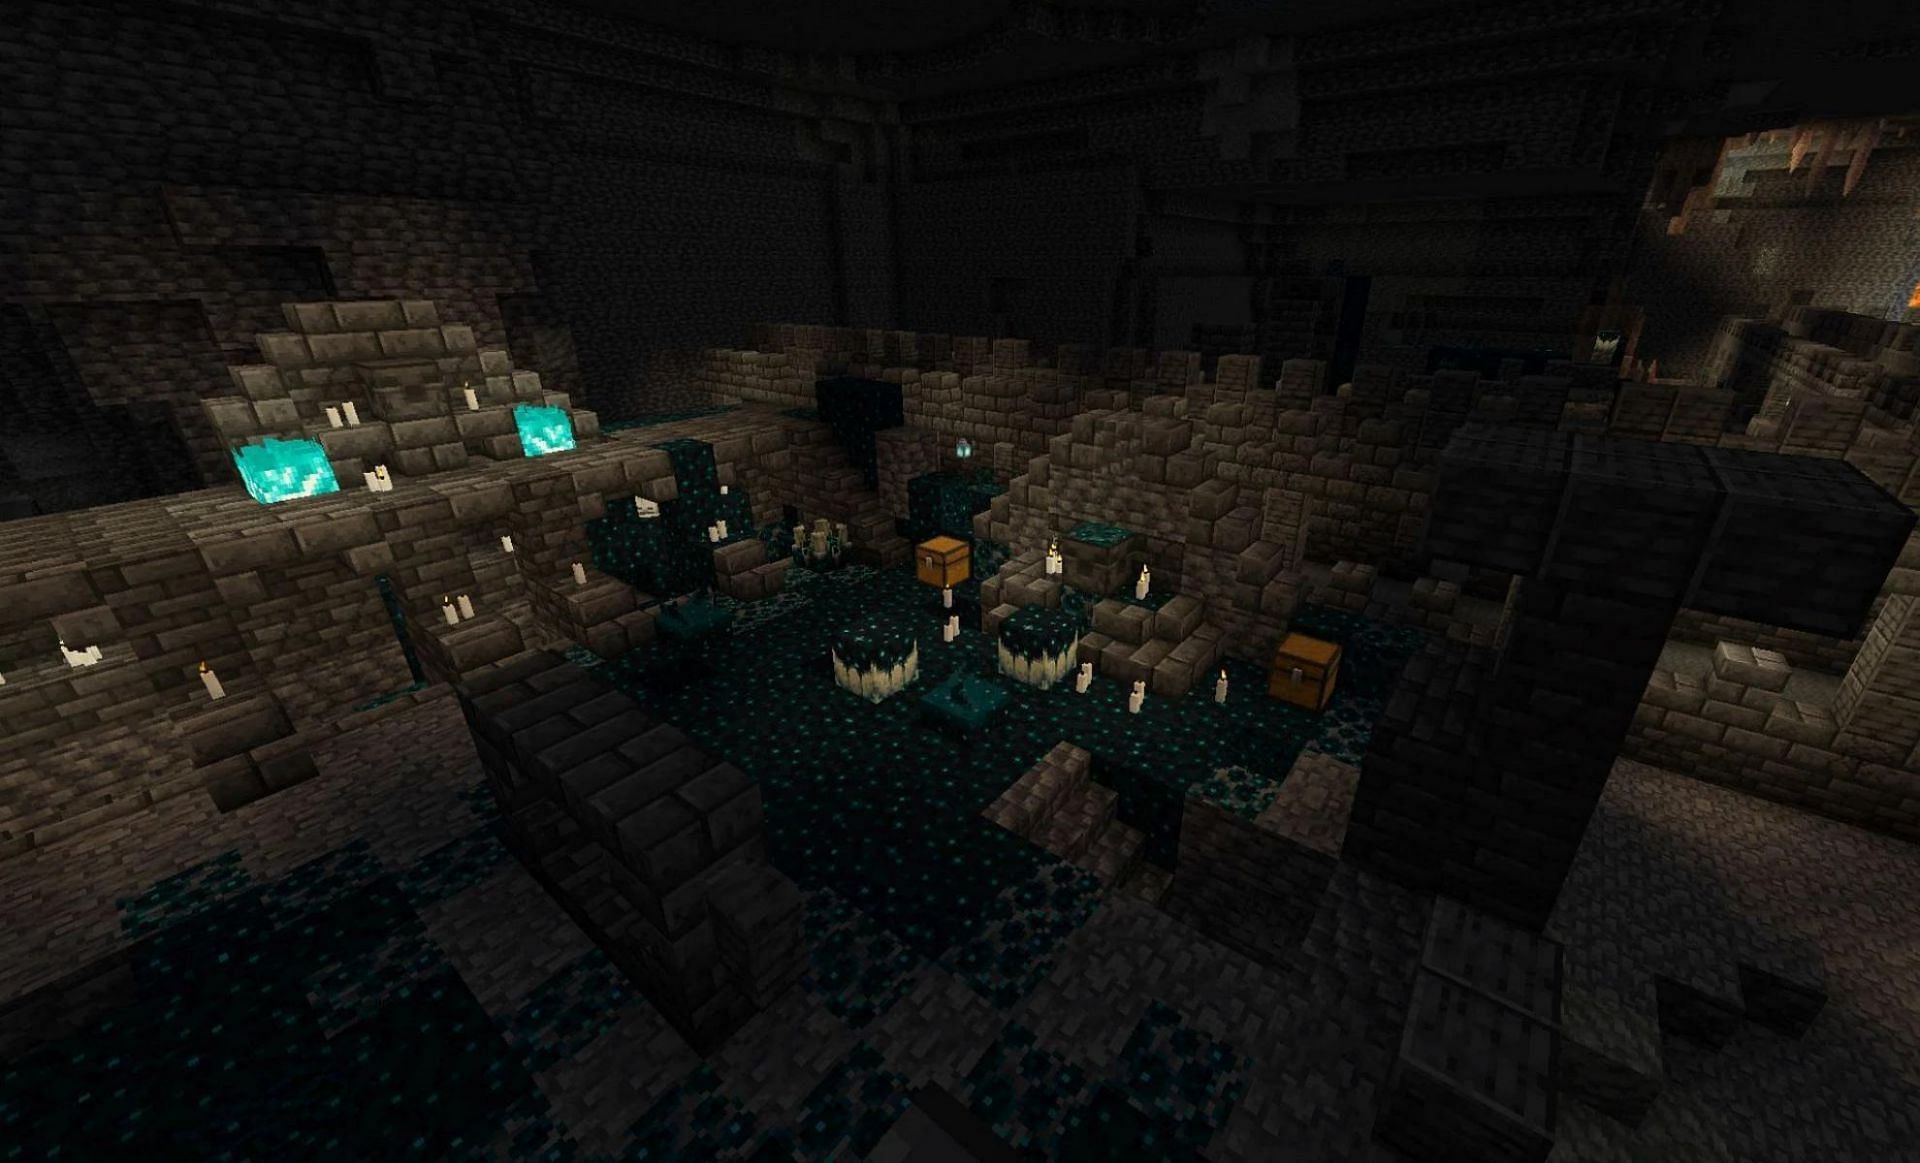 The updated Deep Dark has chests and the Warden (Image via Minecraft Wiki)